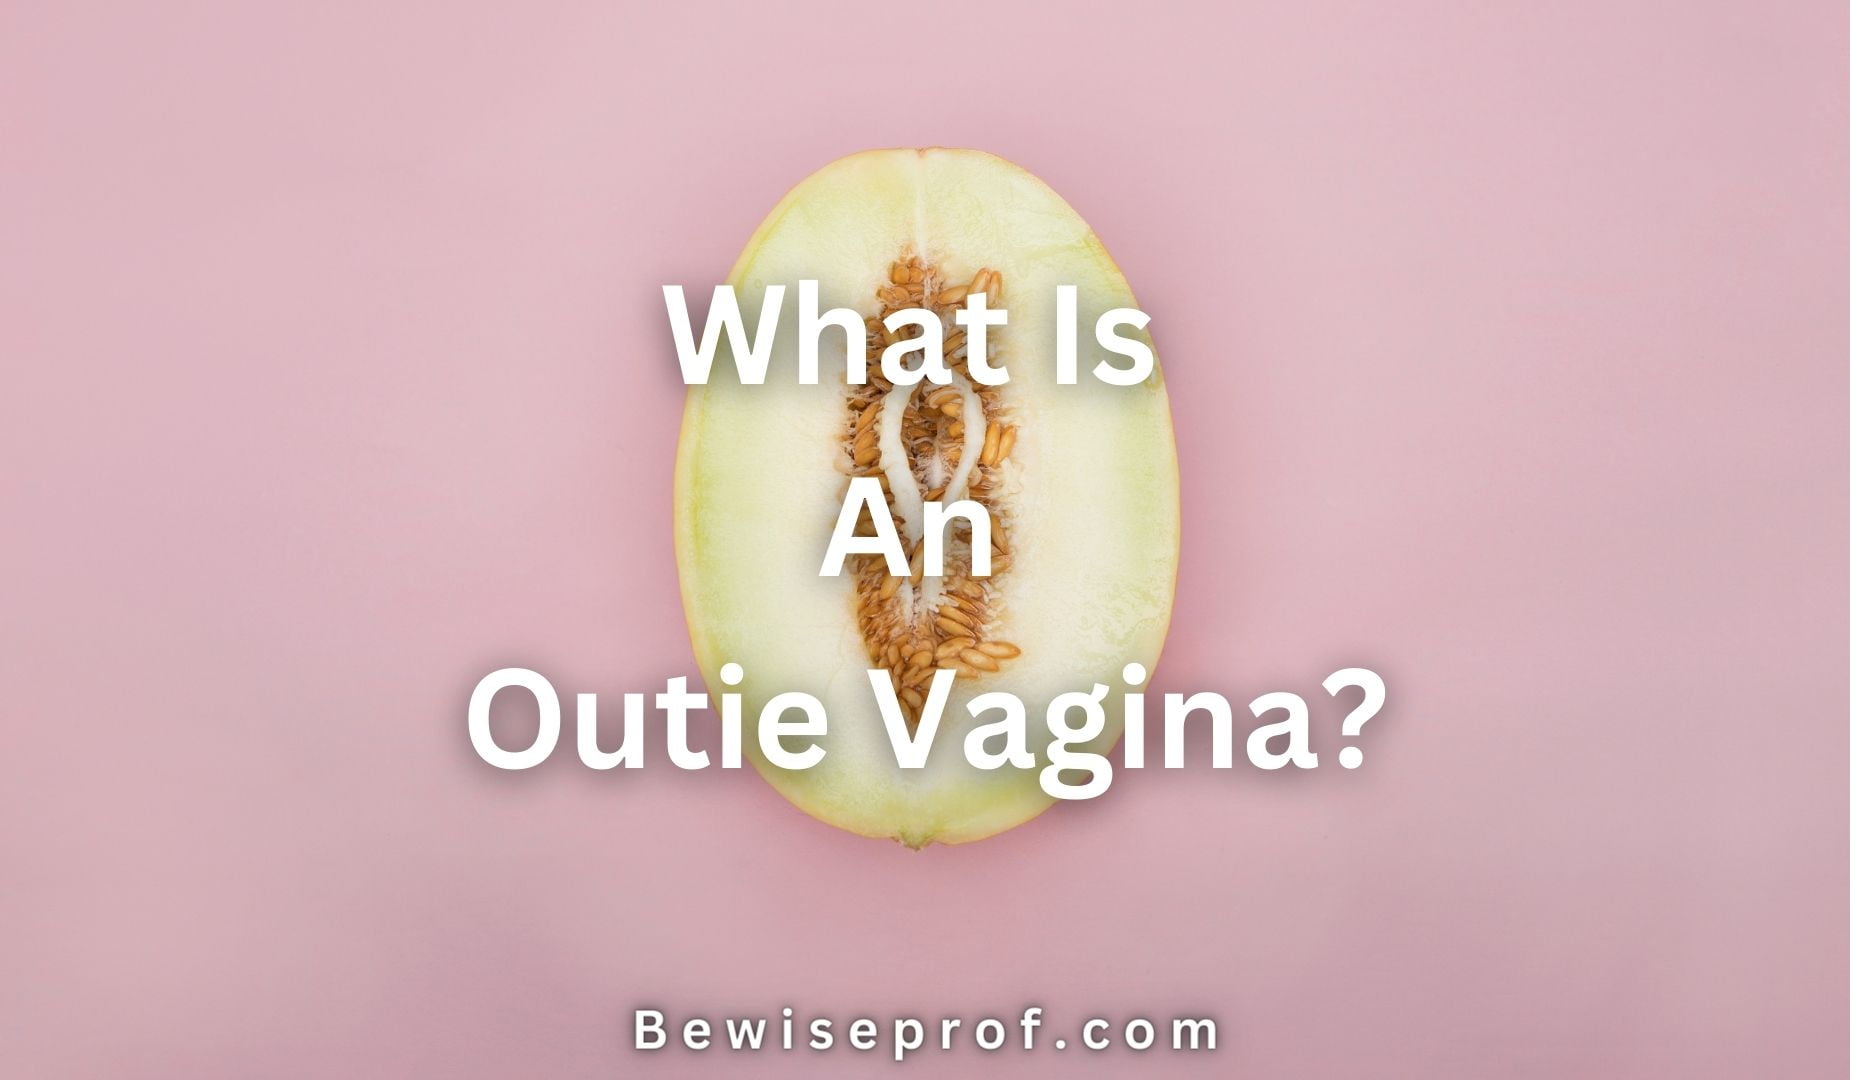 What Is An Outie Vagina?